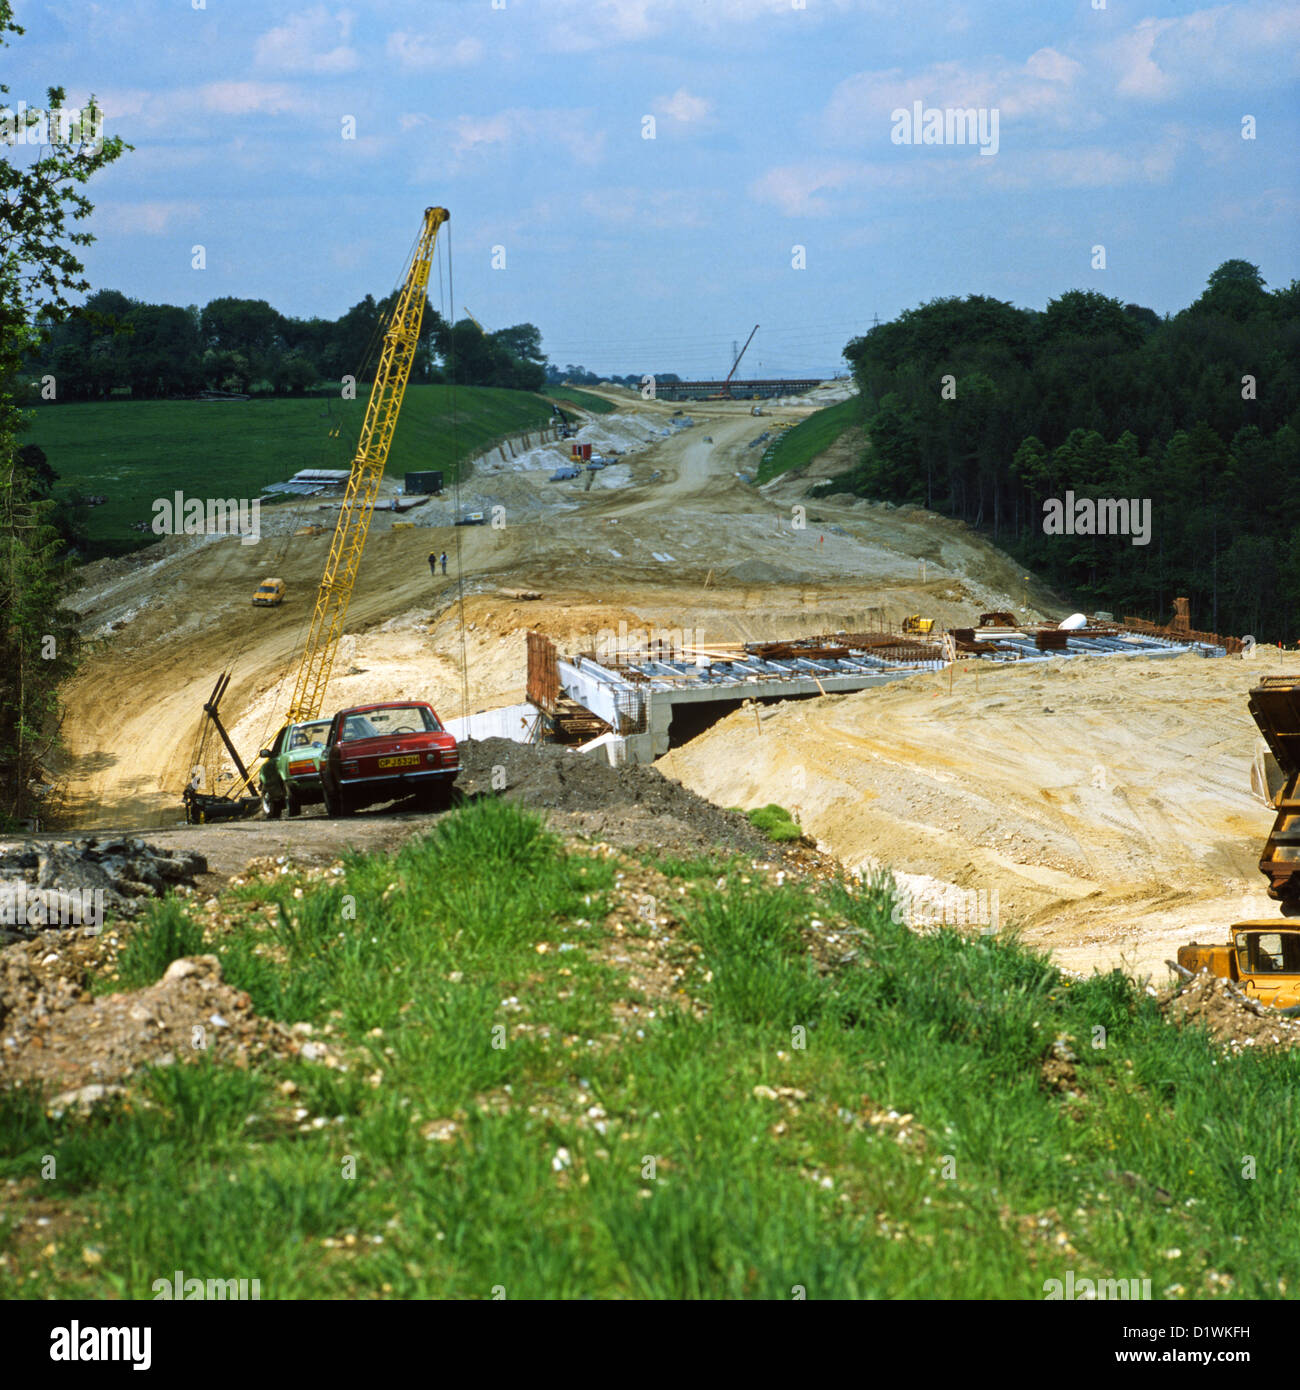 Construction of the M25 motorway between junctions 4 and 5 Stock Photo